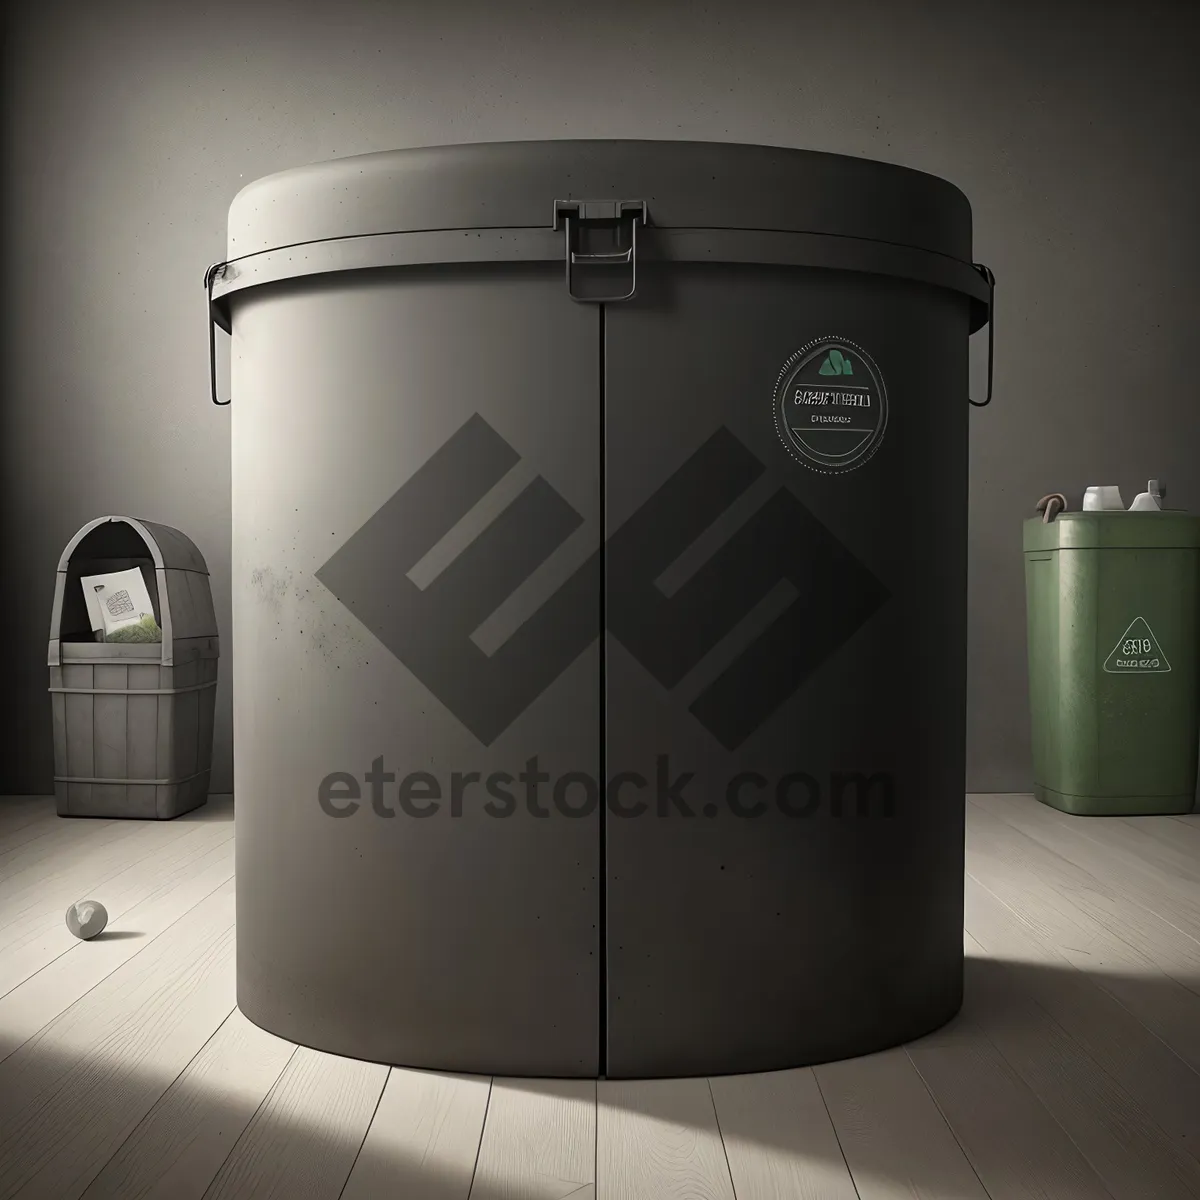 Picture of Metal Ashcan Container Bin